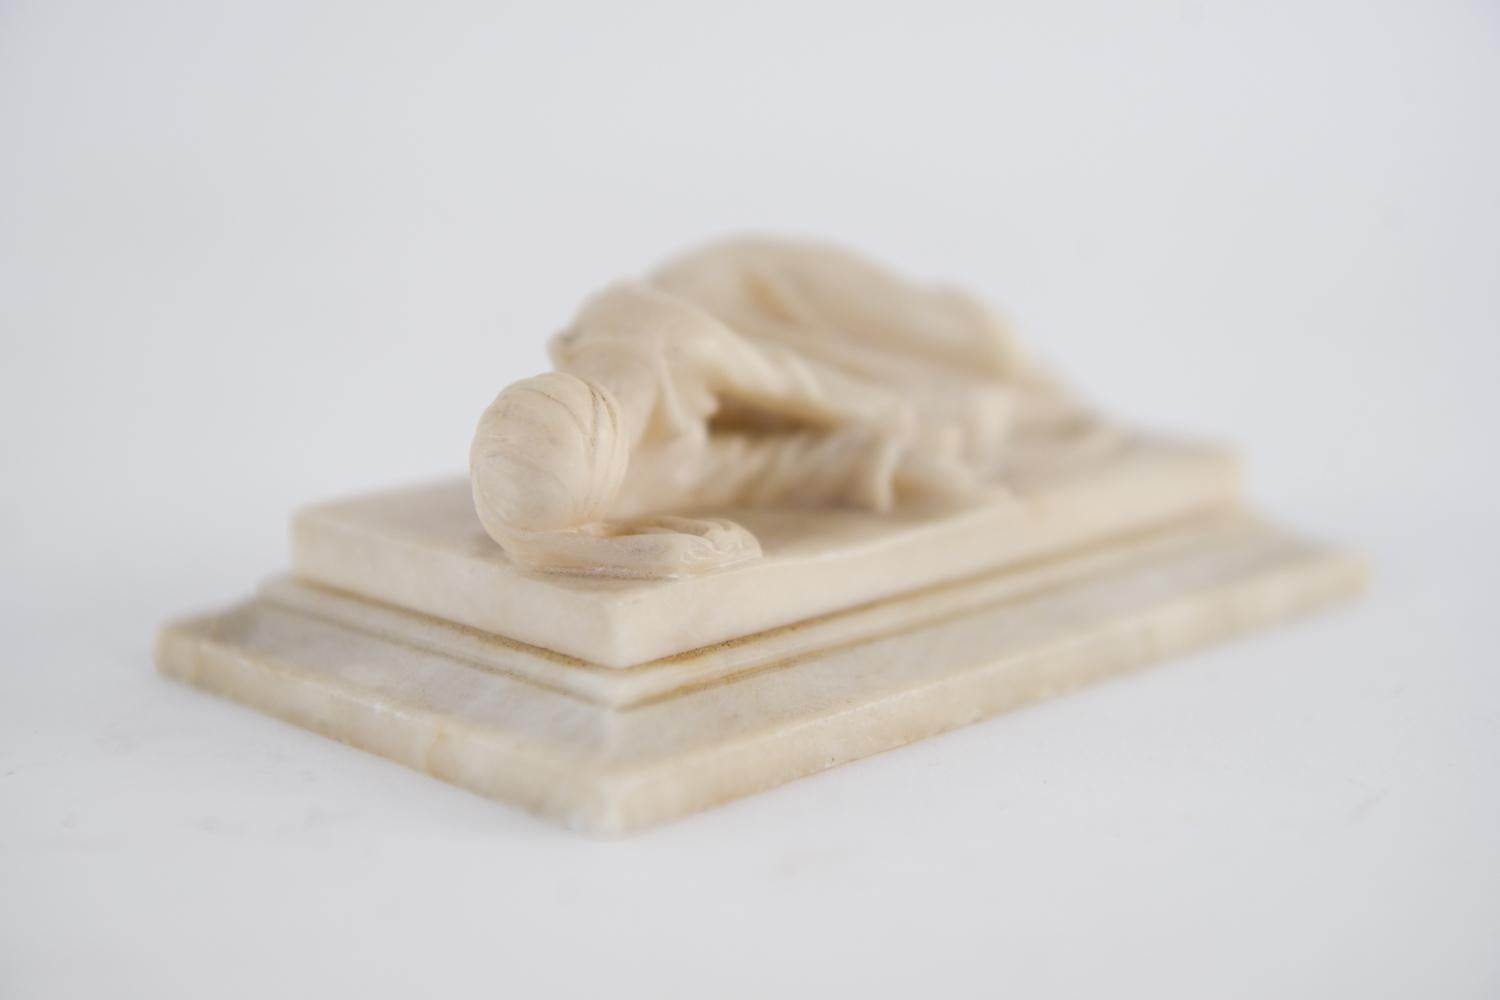 Italian 19th C. Alabaster Paperweight After Maderno, 